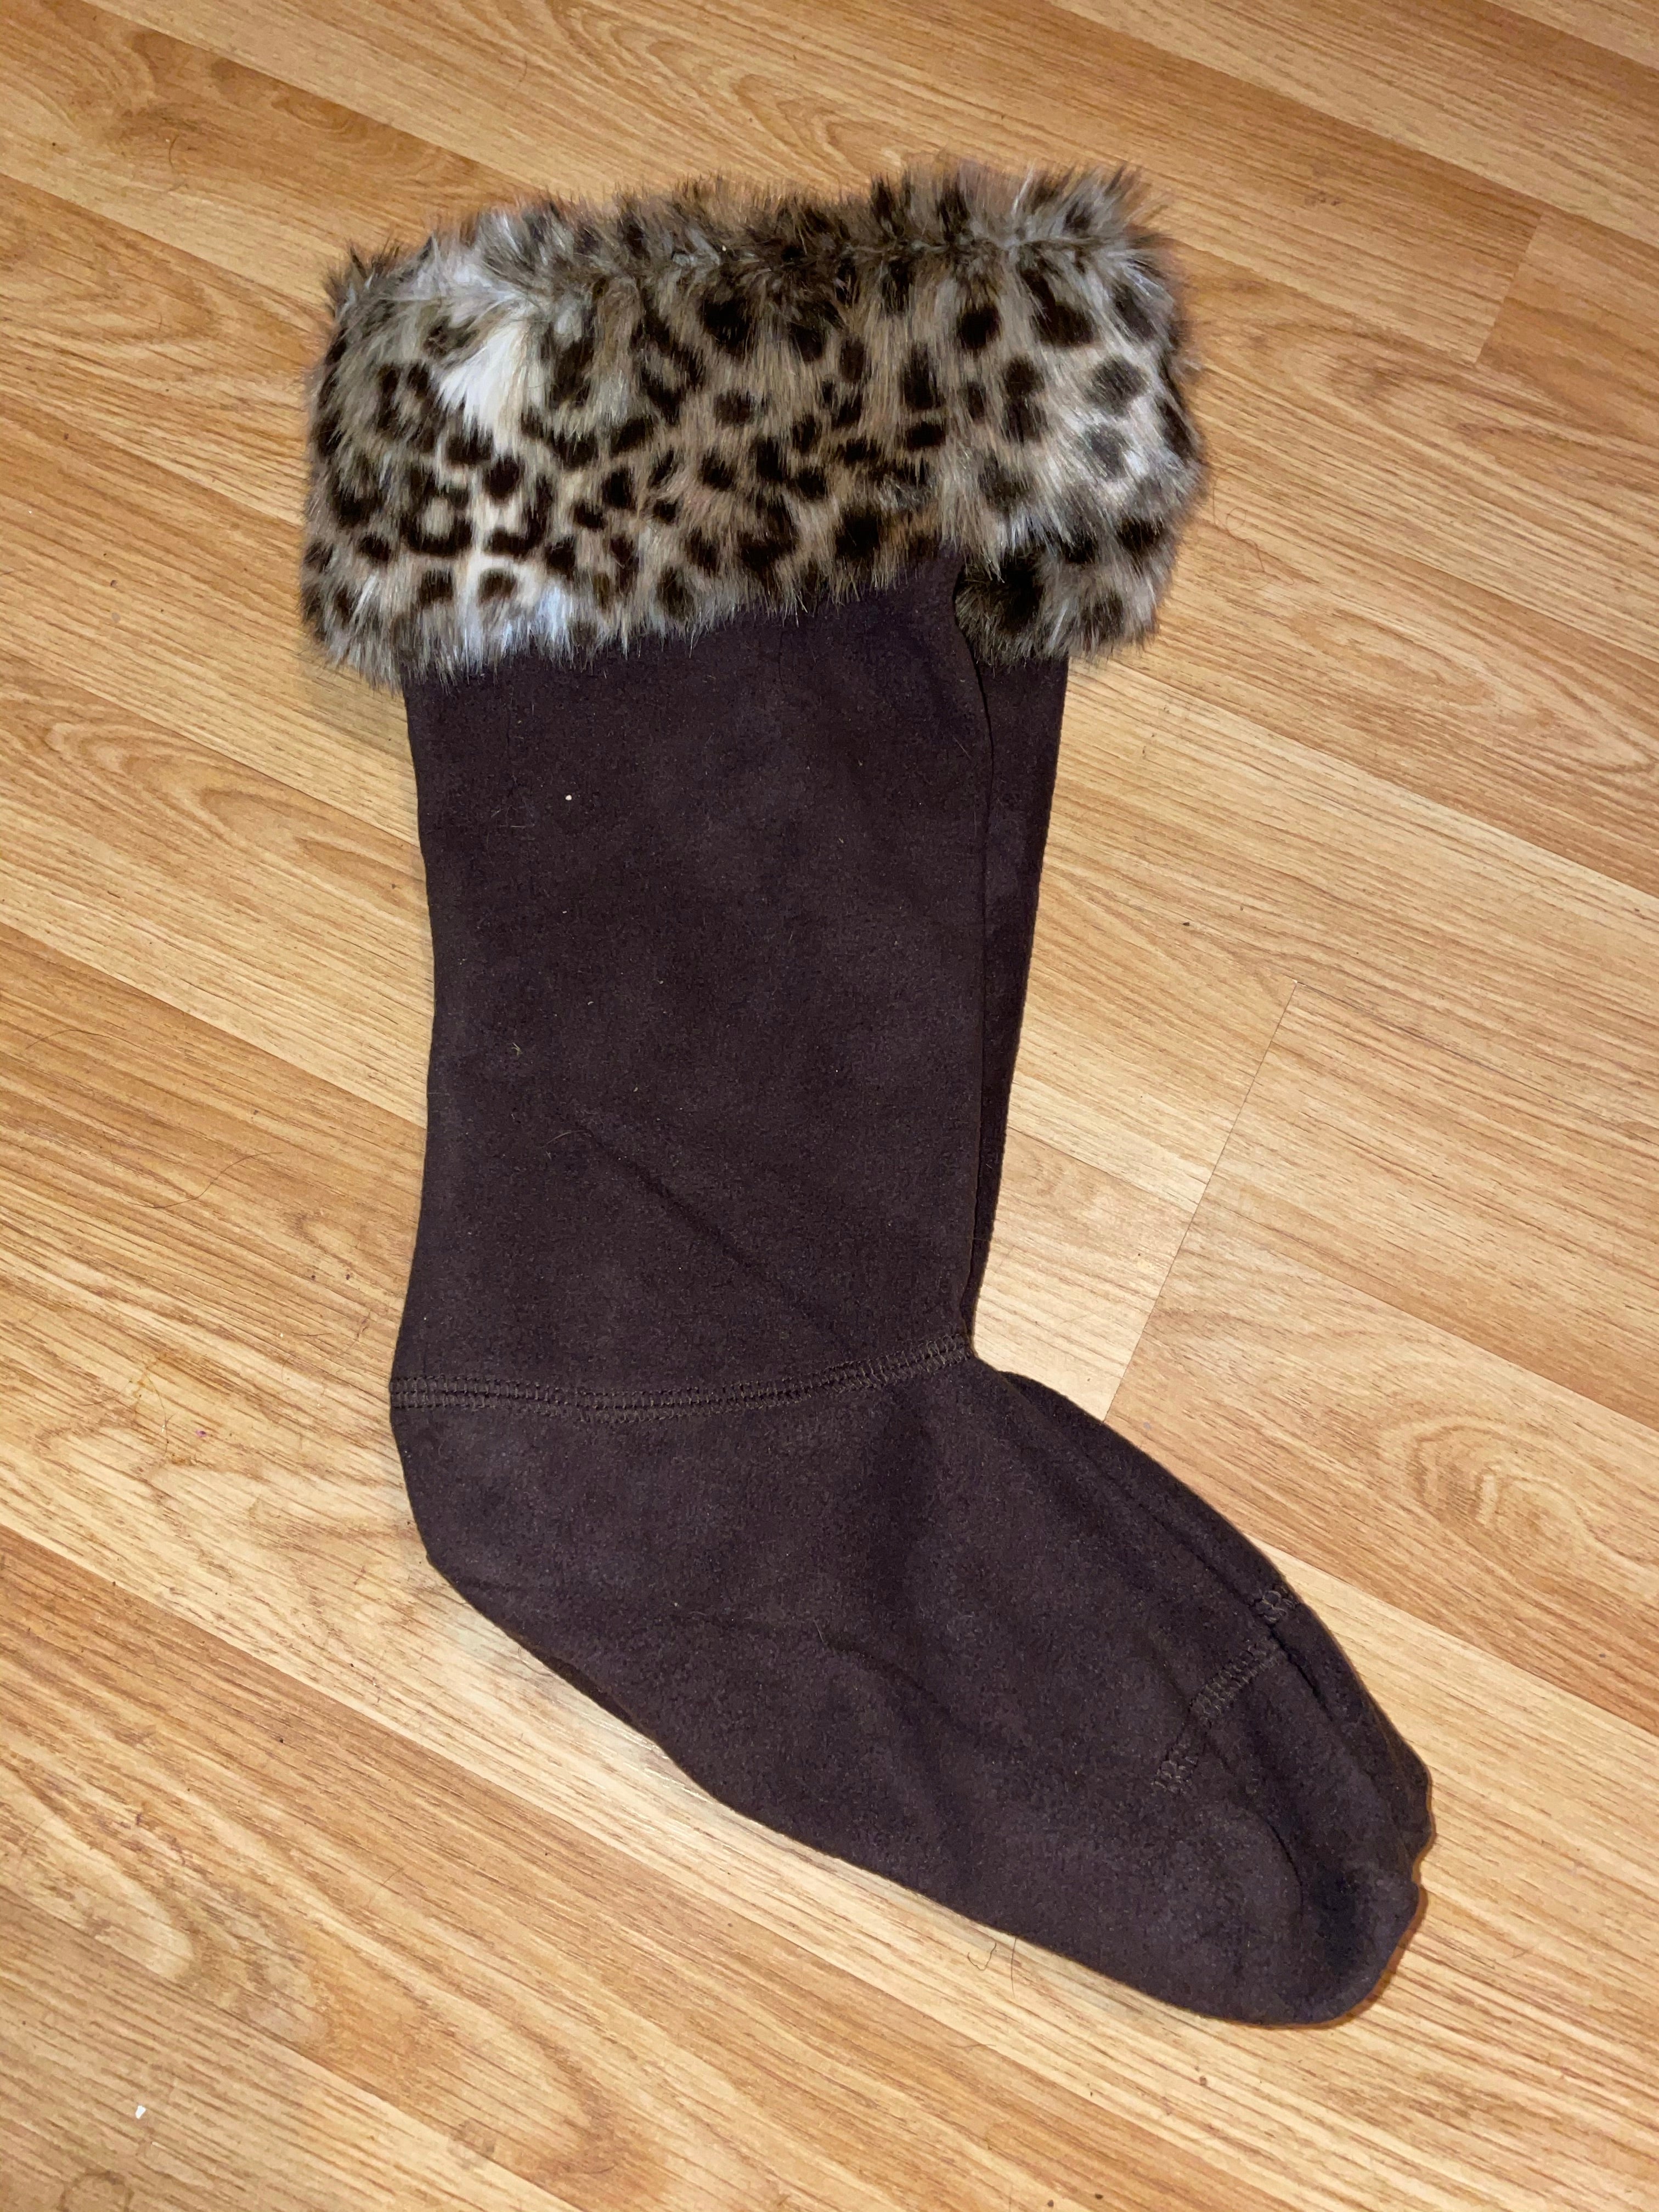 Carrots Equestrian Leopard Print Wellie Liners - Size 3/5